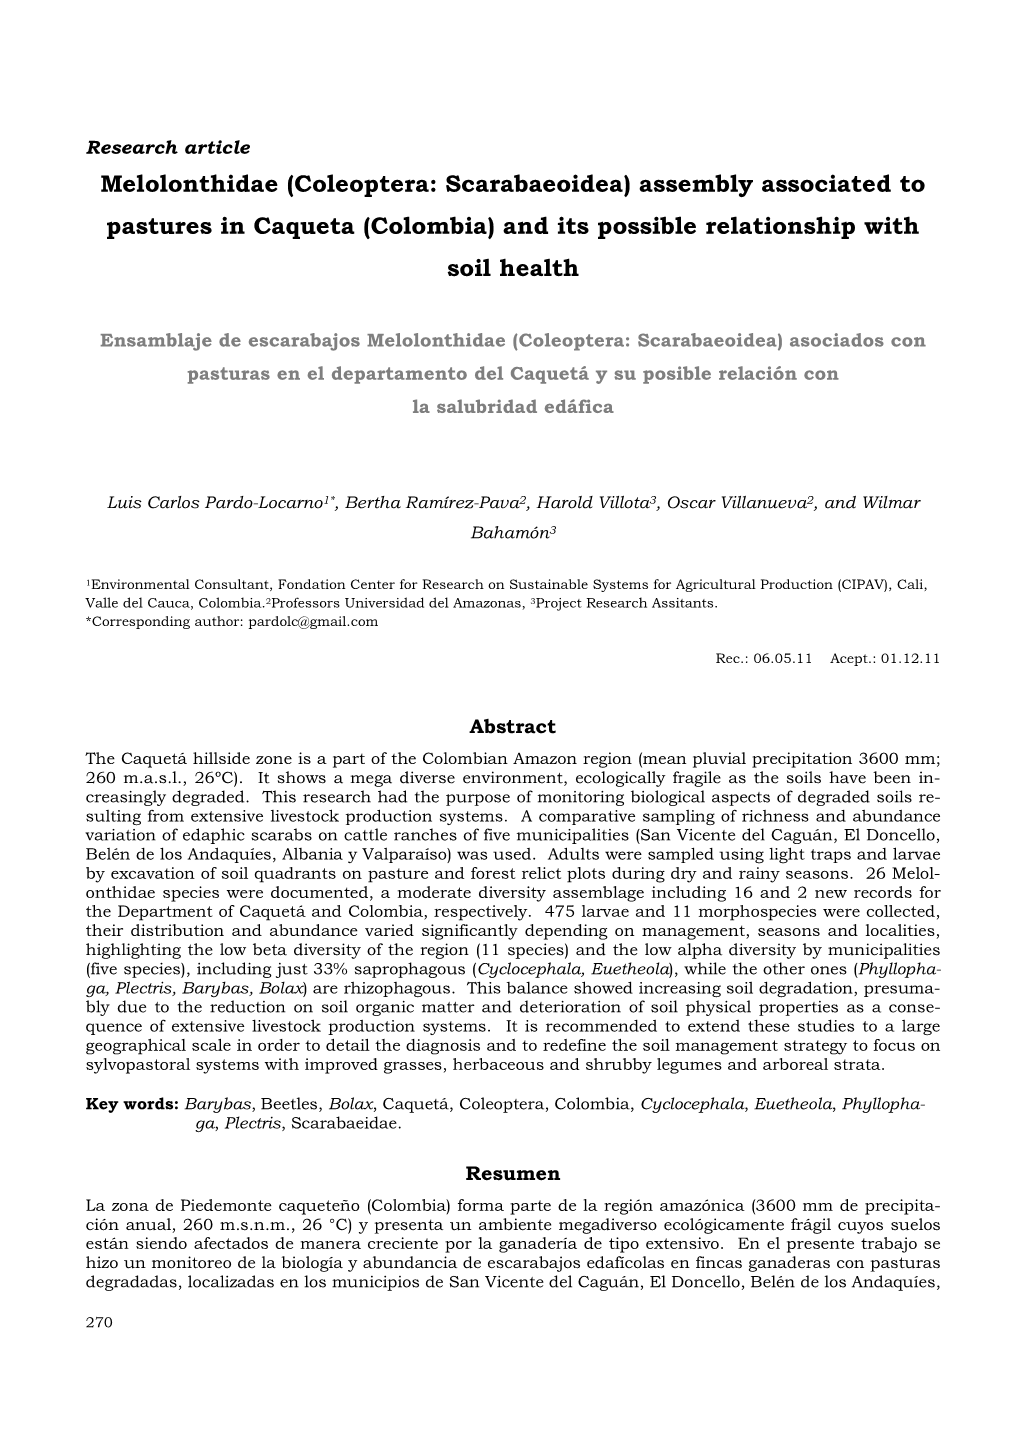 Assembly Associated to Pastures in Caqueta (Colombia) and Its Possible Relationship with Soil Health